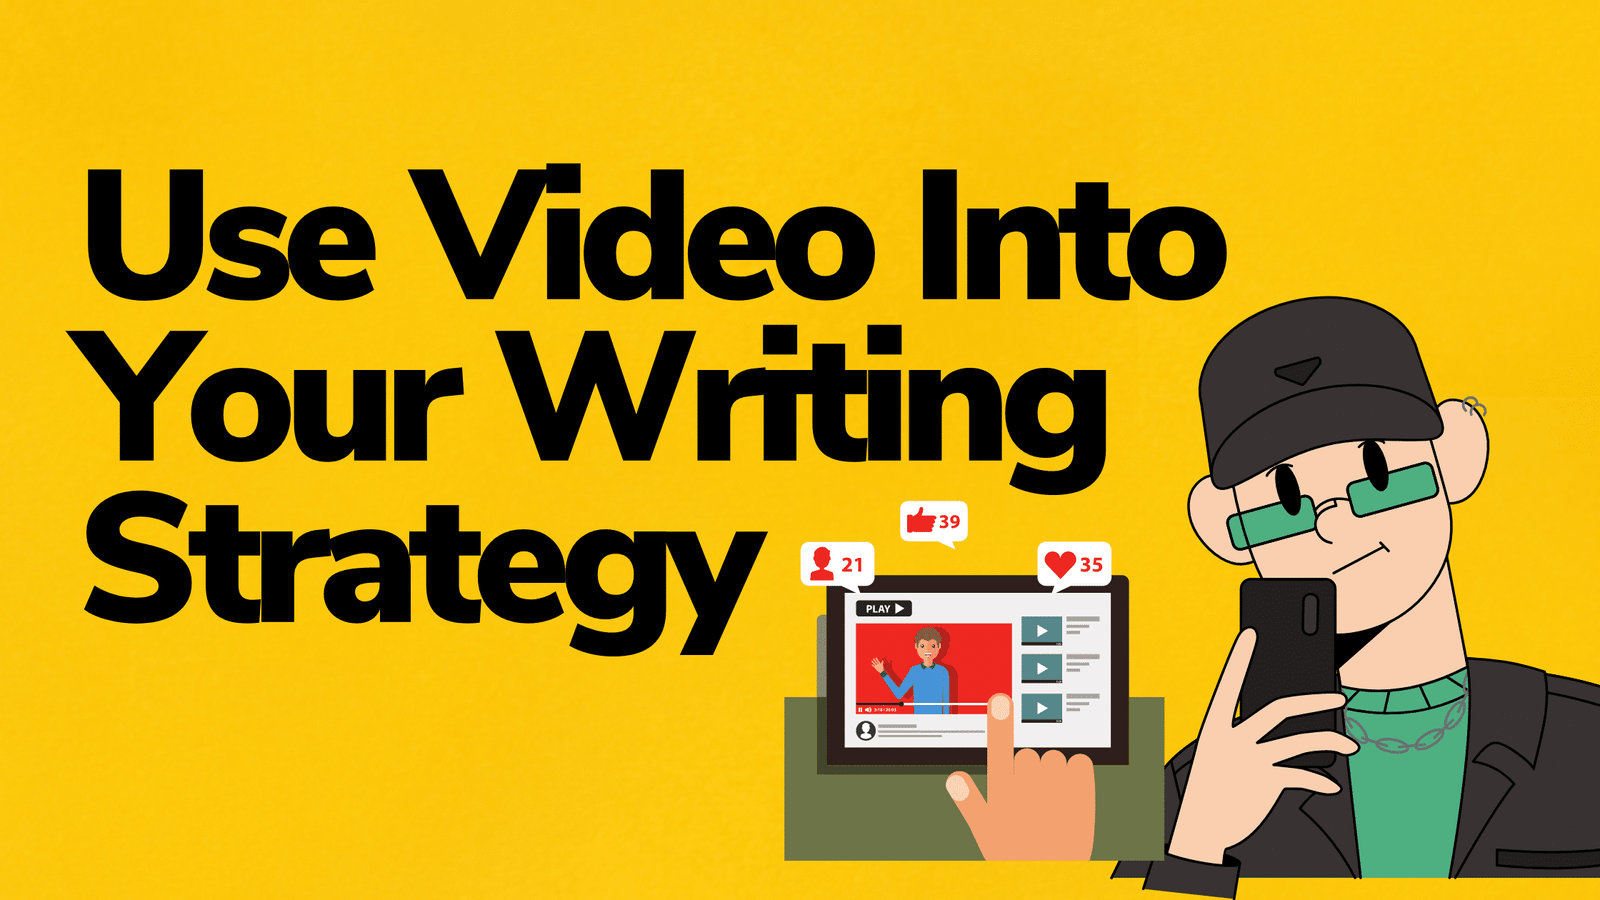 Incorporate Video into Your Writing Strategy